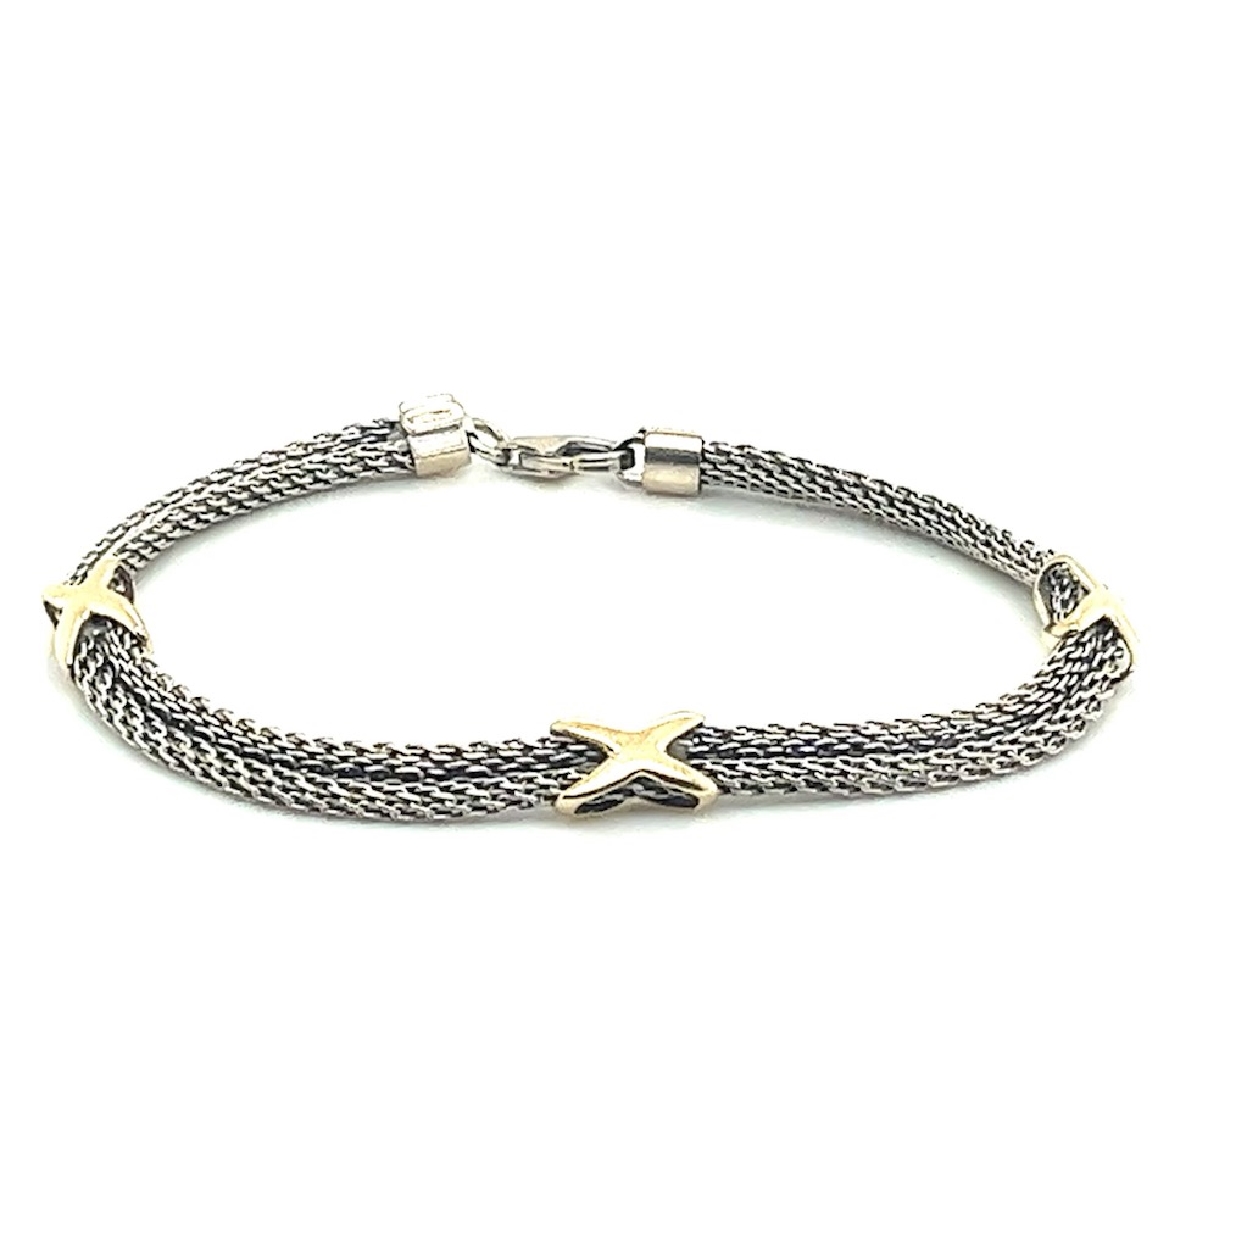 14K White Gold Chain Mail Bracelet with Yellow Gold X Accents 
7 Inches